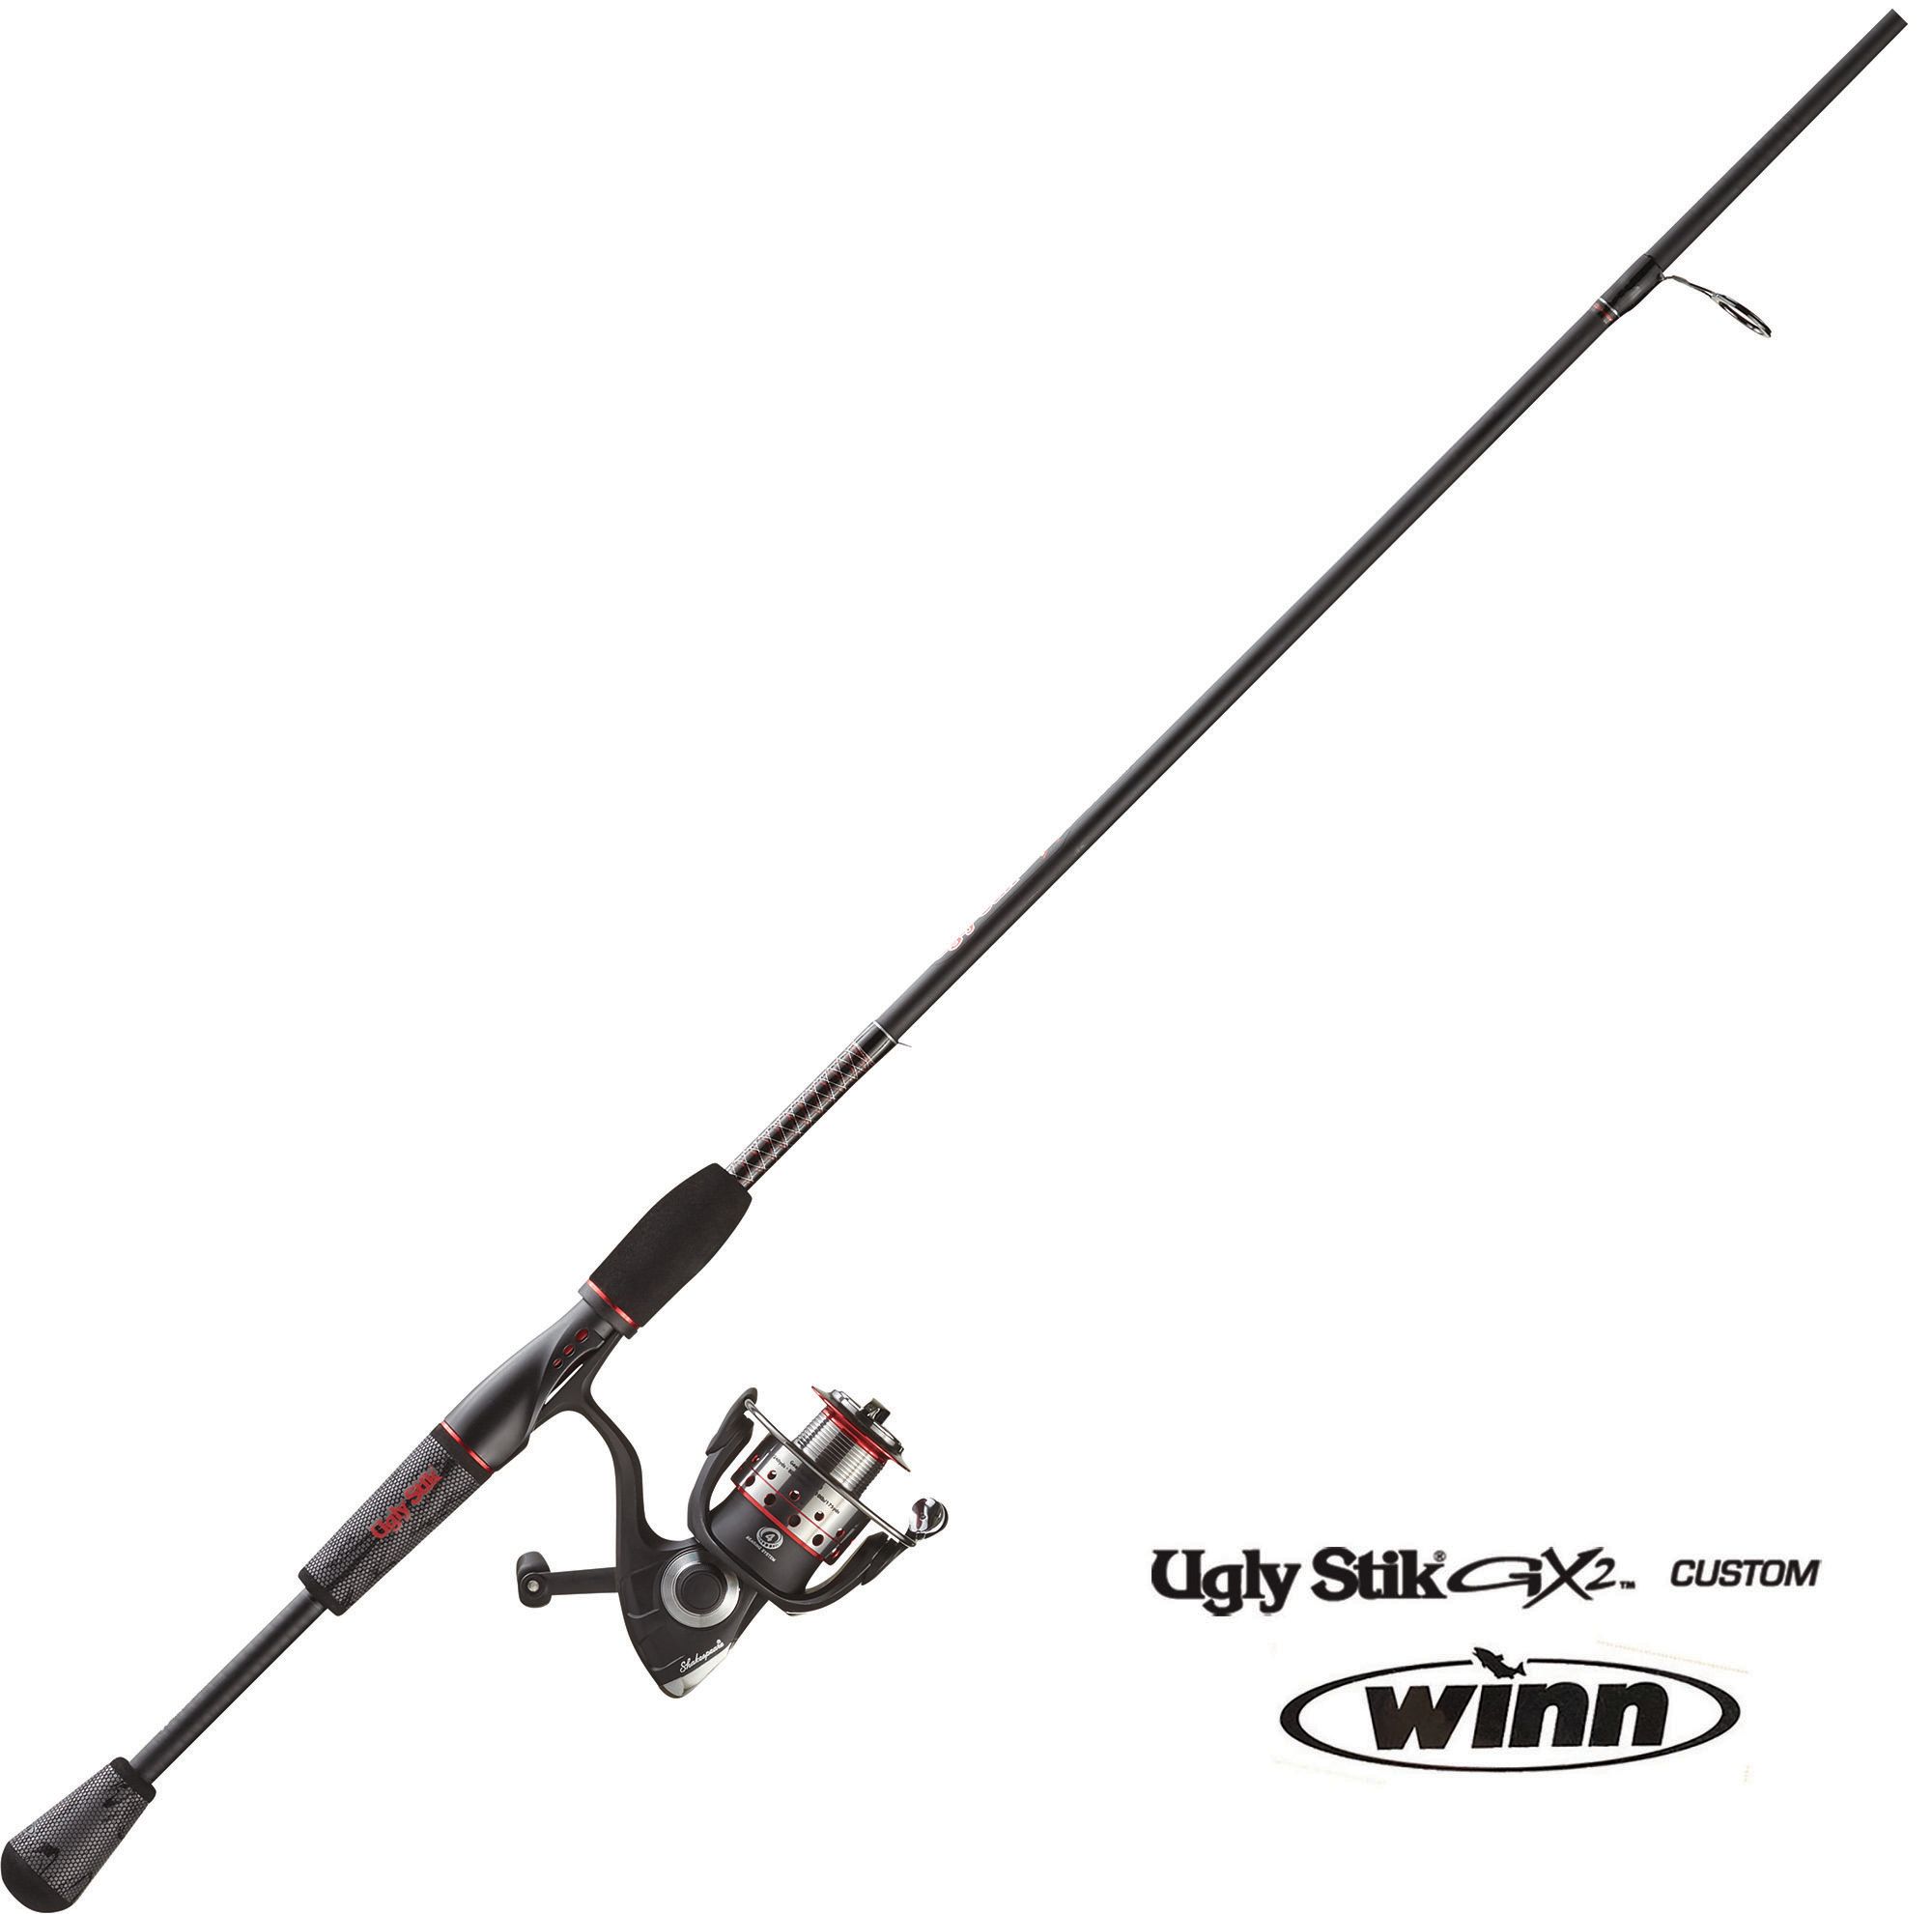 Shop Fishing Gear & Tackle - Up to 30% Off - DICK'S Sporting Goods